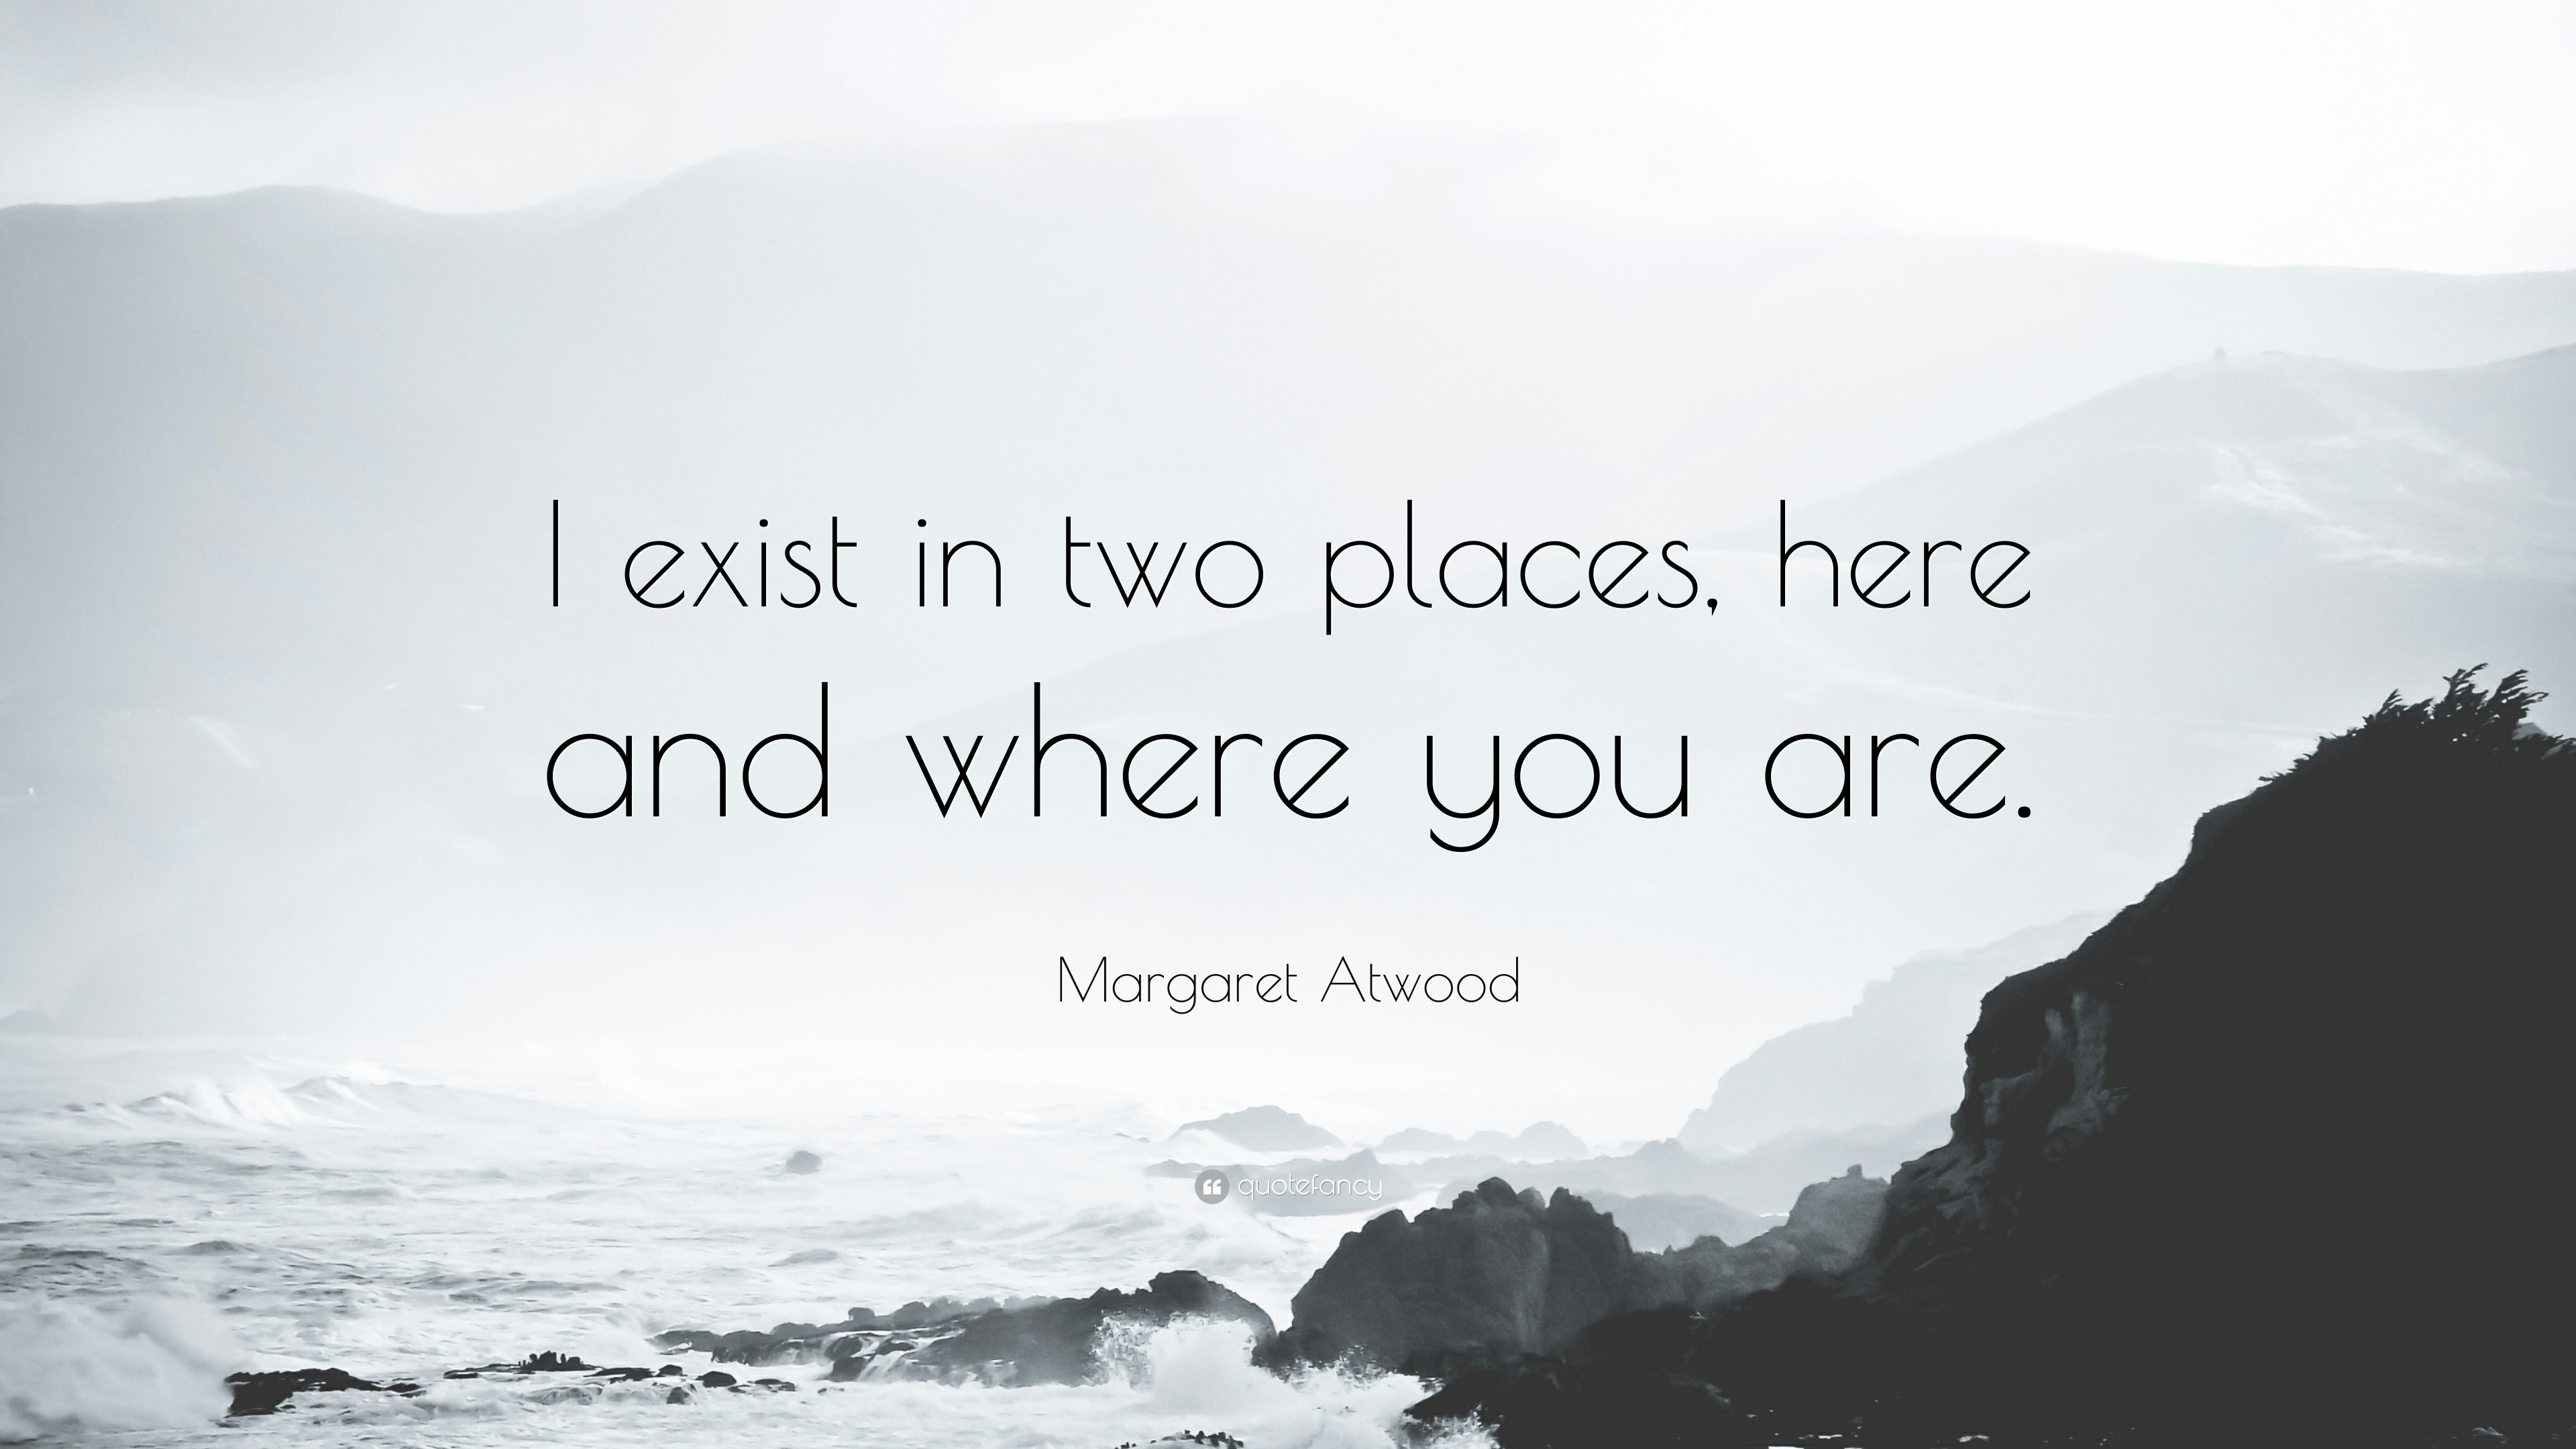 255529 Margaret Atwood Quote I exist in two places here and where you are